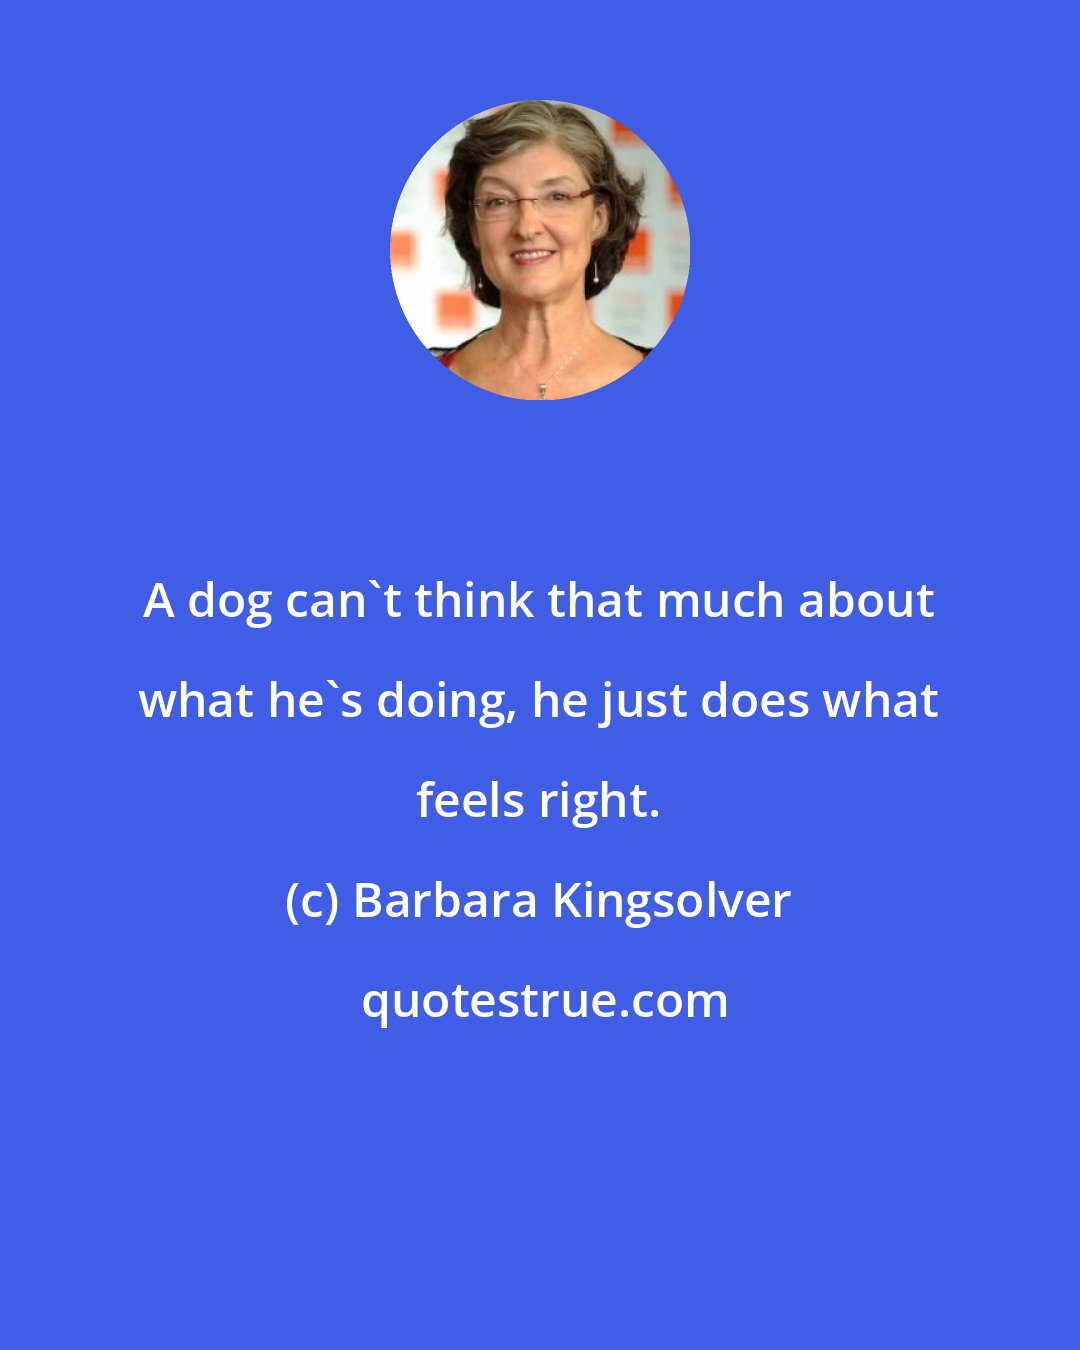 Barbara Kingsolver: A dog can't think that much about what he's doing, he just does what feels right.